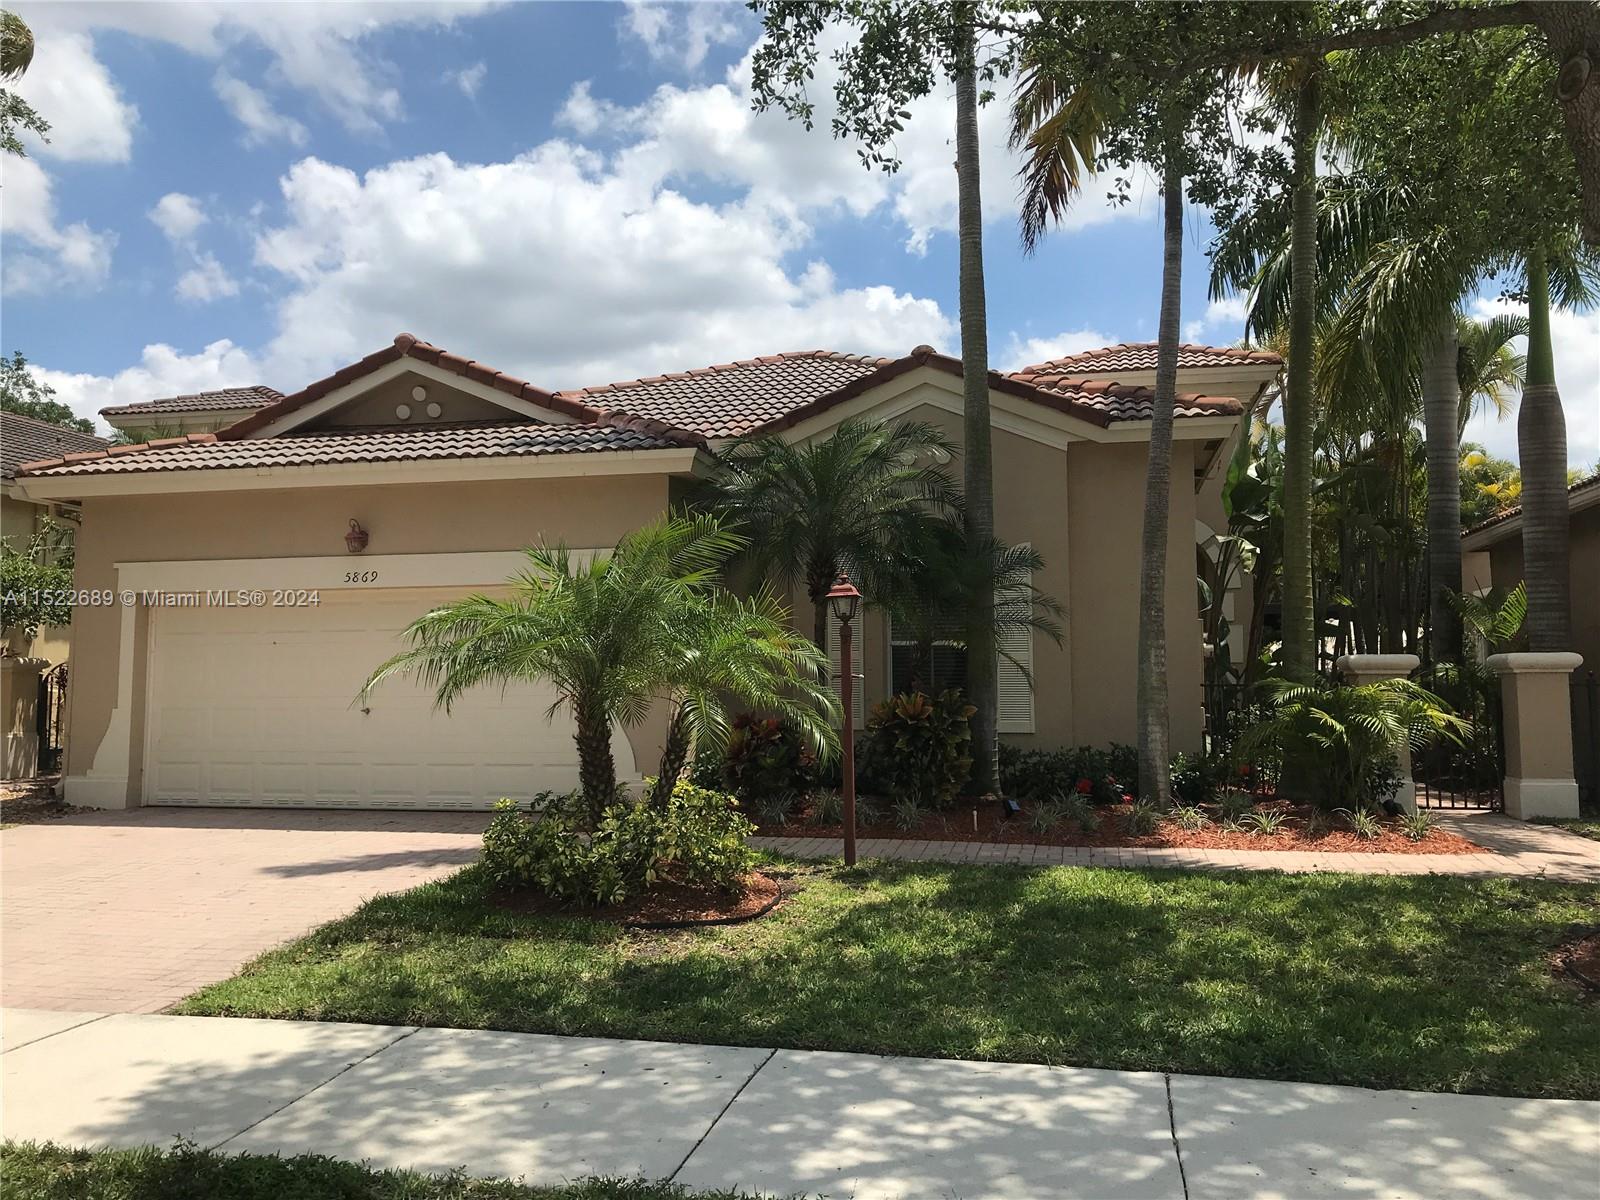 5869 NW 120th Ave 0, Coral Springs, Florida 33076, 3 Bedrooms Bedrooms, ,2 BathroomsBathrooms,Residentiallease,For Rent,5869 NW 120th Ave 0,A11522689